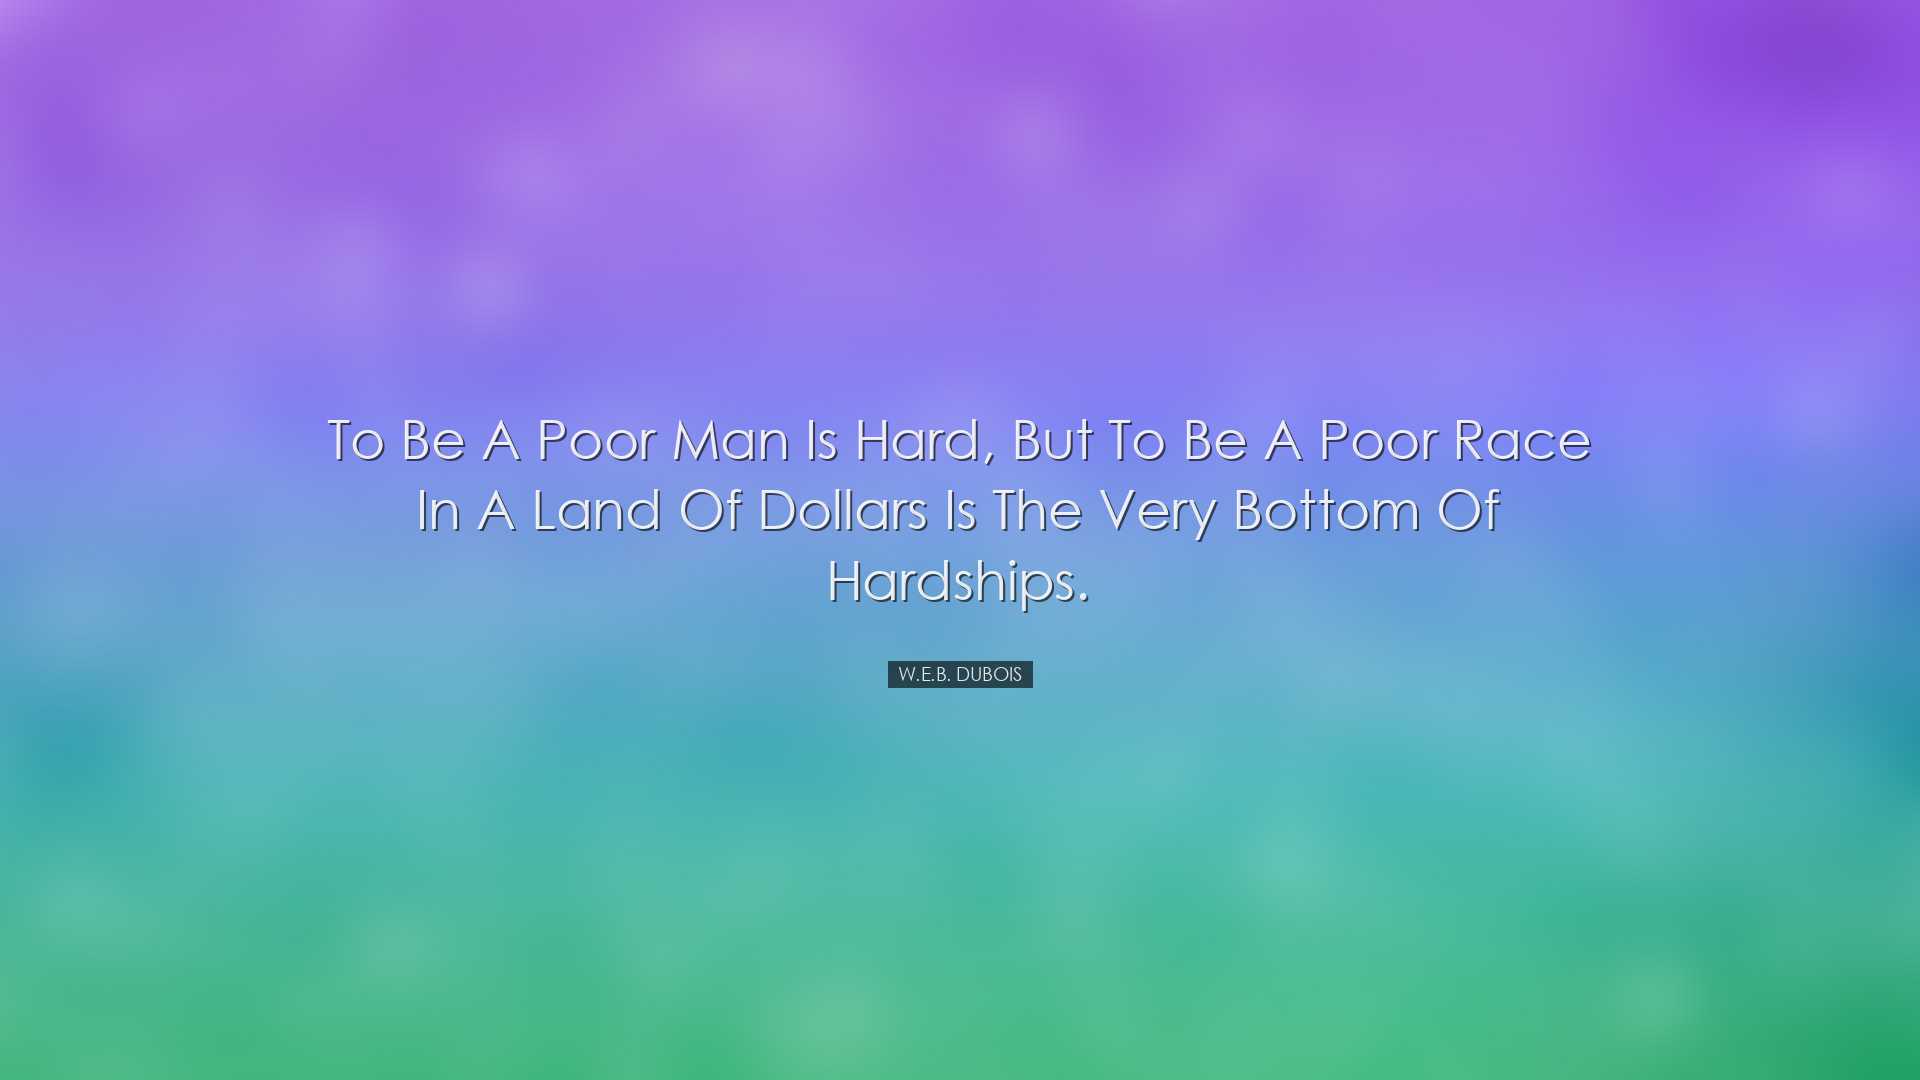 To be a poor man is hard, but to be a poor race in a land of dolla